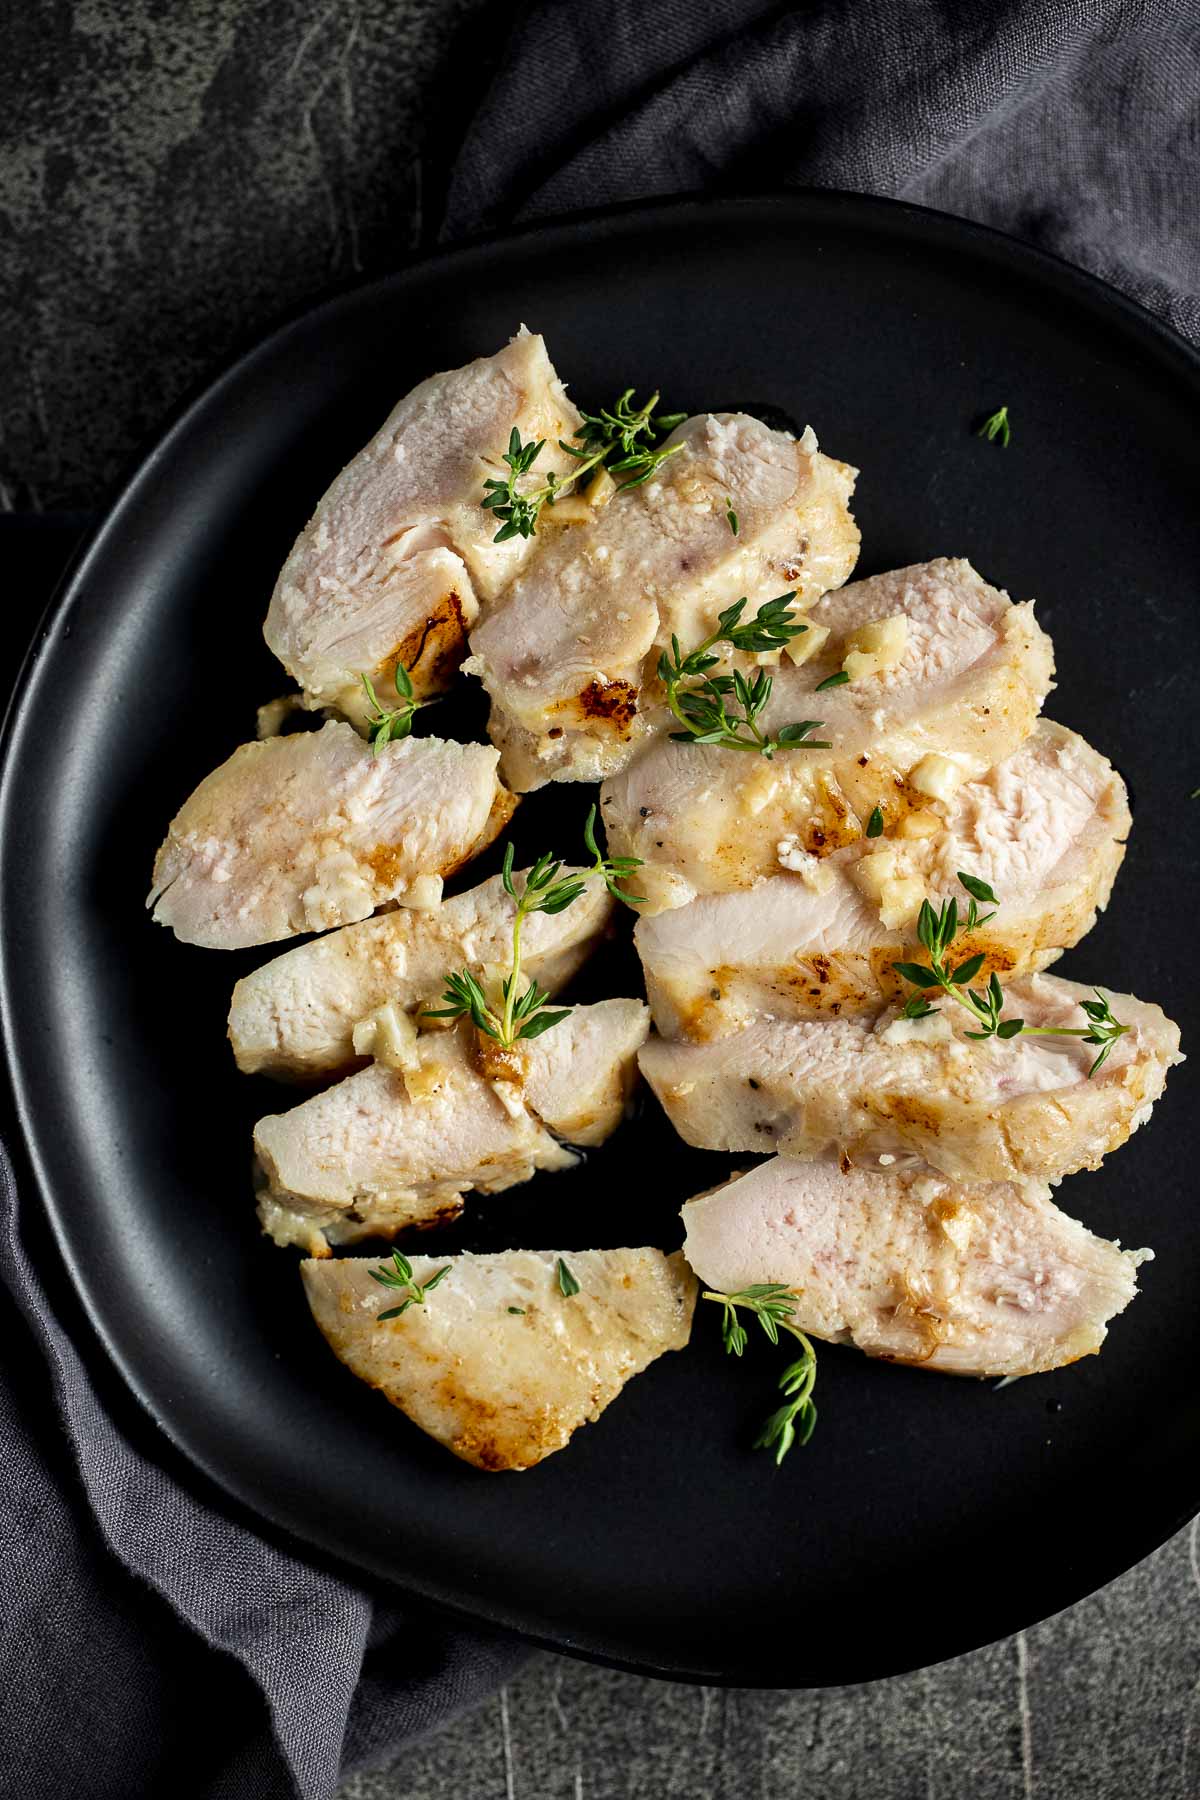 https://www.wenthere8this.com/wp-content/uploads/2021/01/sous-vide-chicken-breast-2.jpg